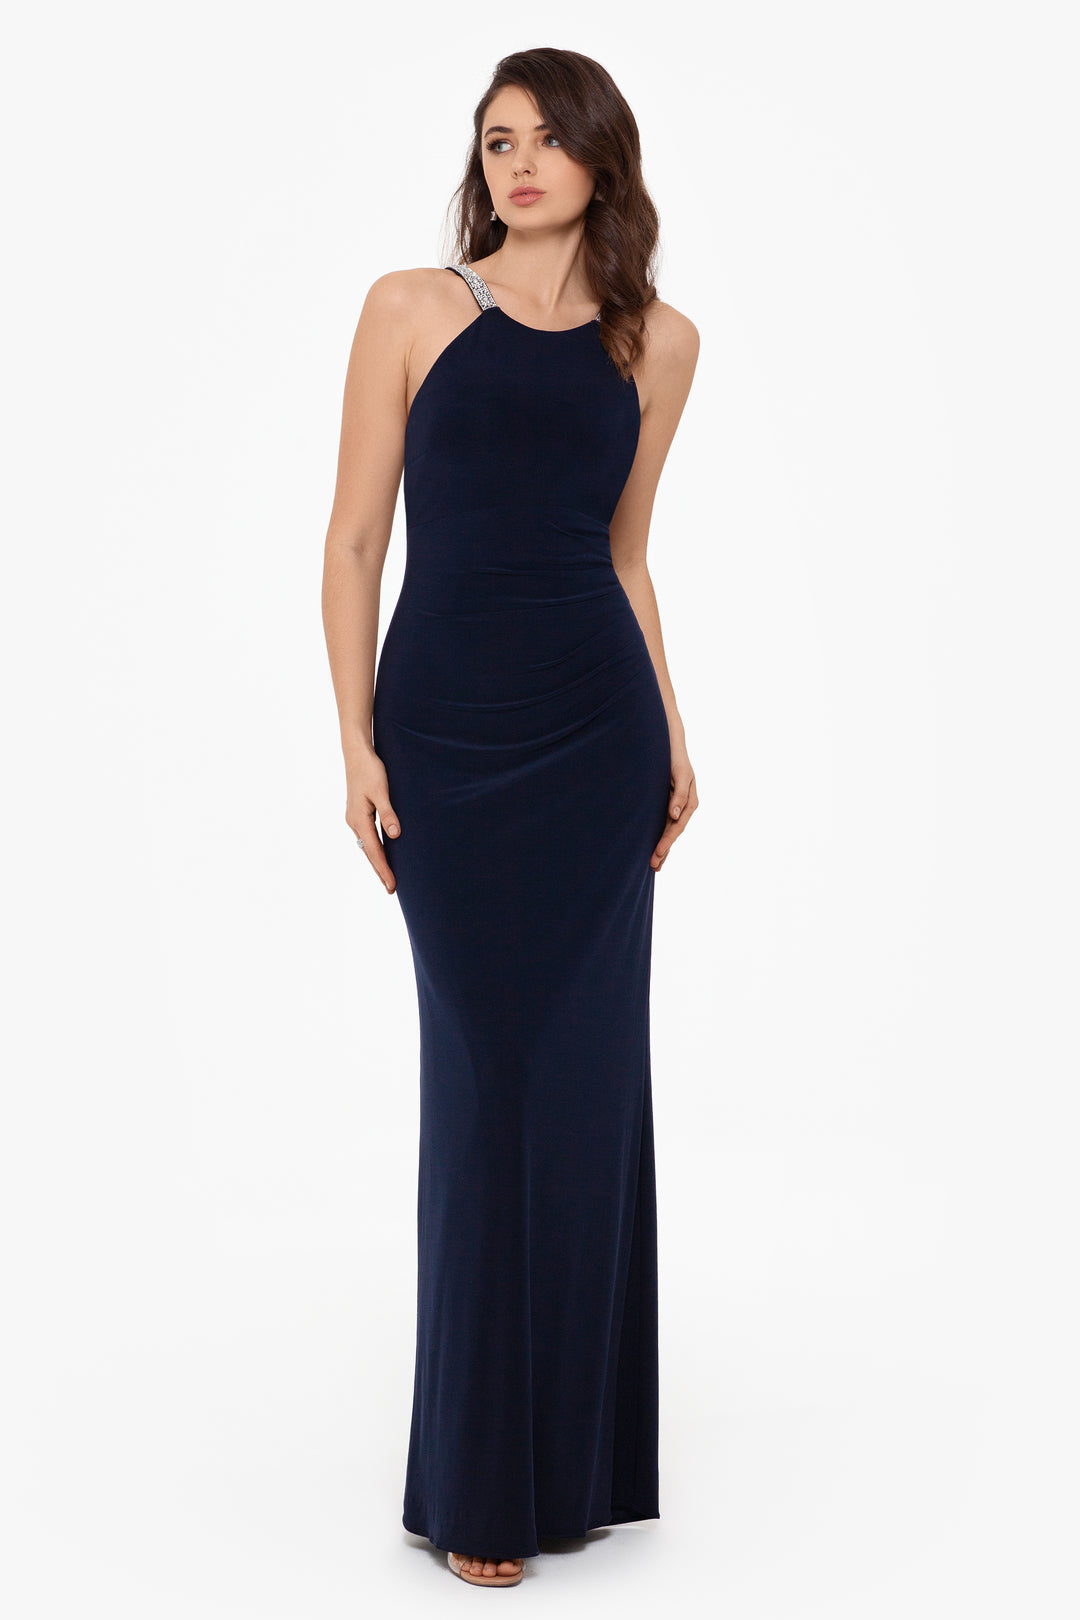 "Jayleen" High Neck Side Ruched Stretch Knit Gown - Betsy & Adam